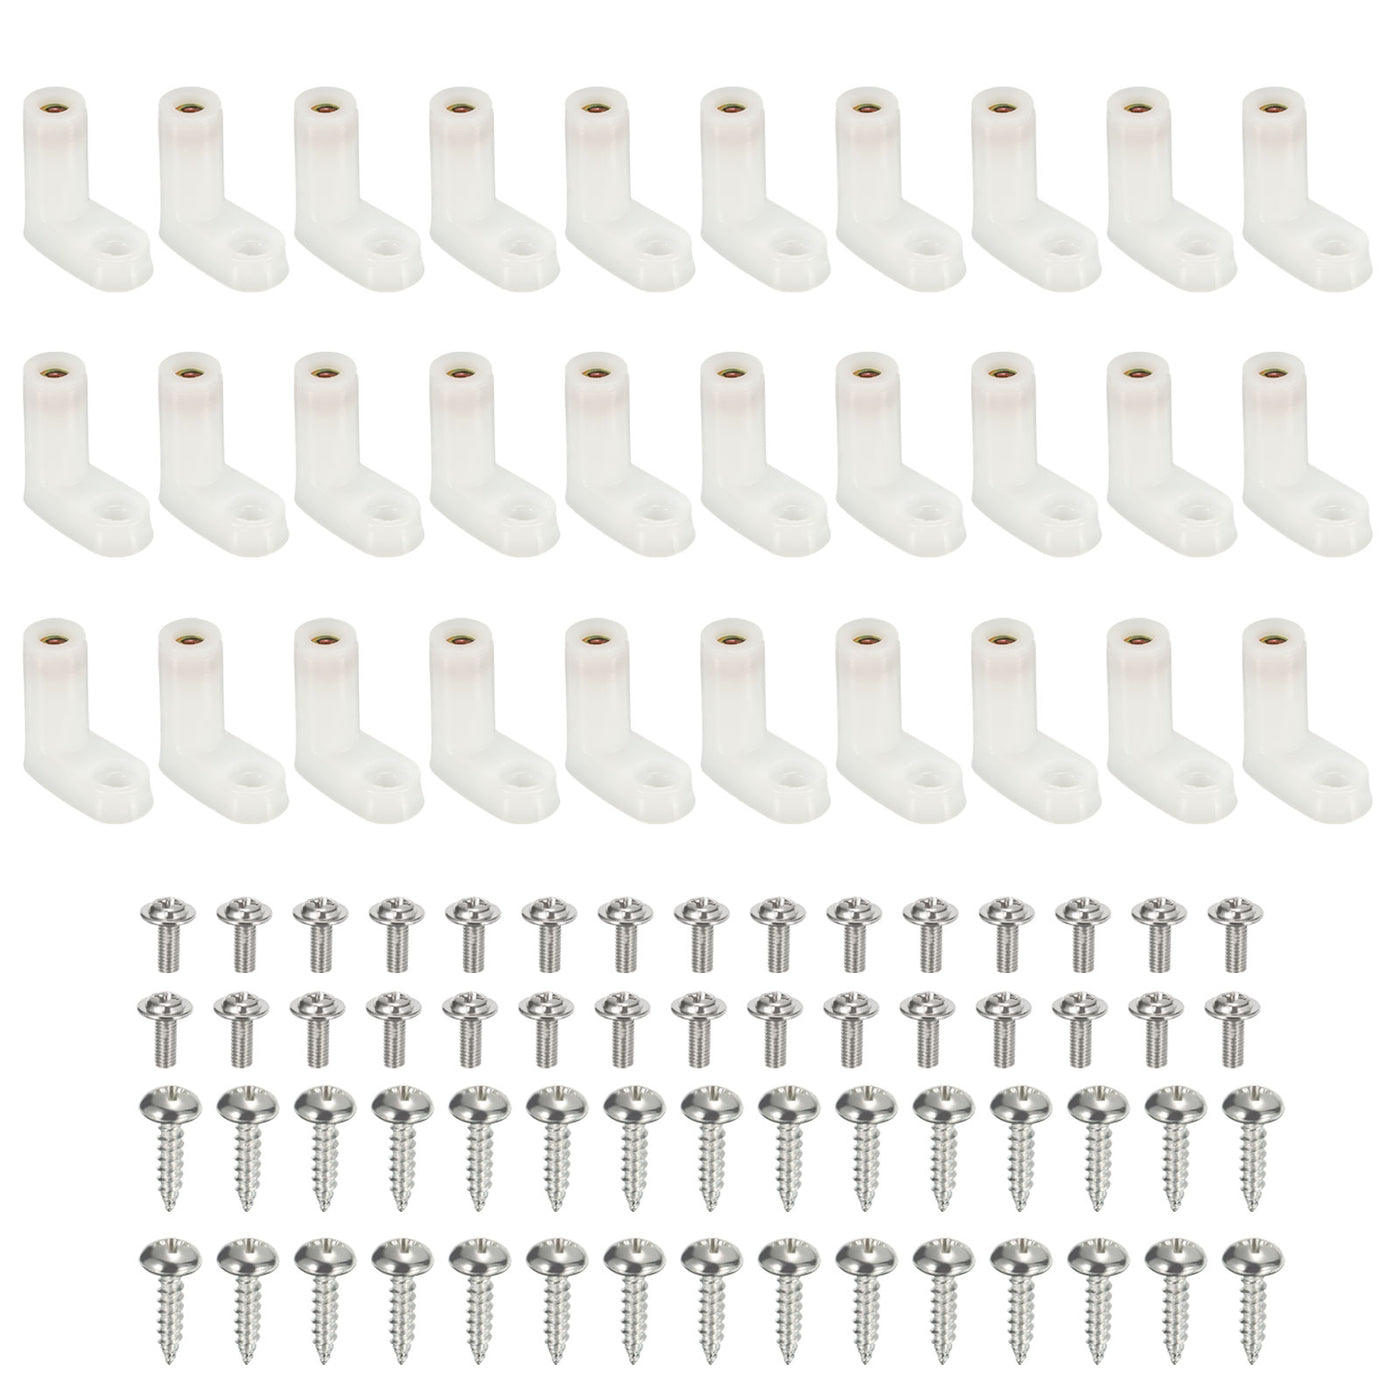 uxcell Uxcell 80 Pcs Circuit Board L Shape Insulated PCB Spacer 20mm Standoffs Mounting Feet Supporting Height with Screws White